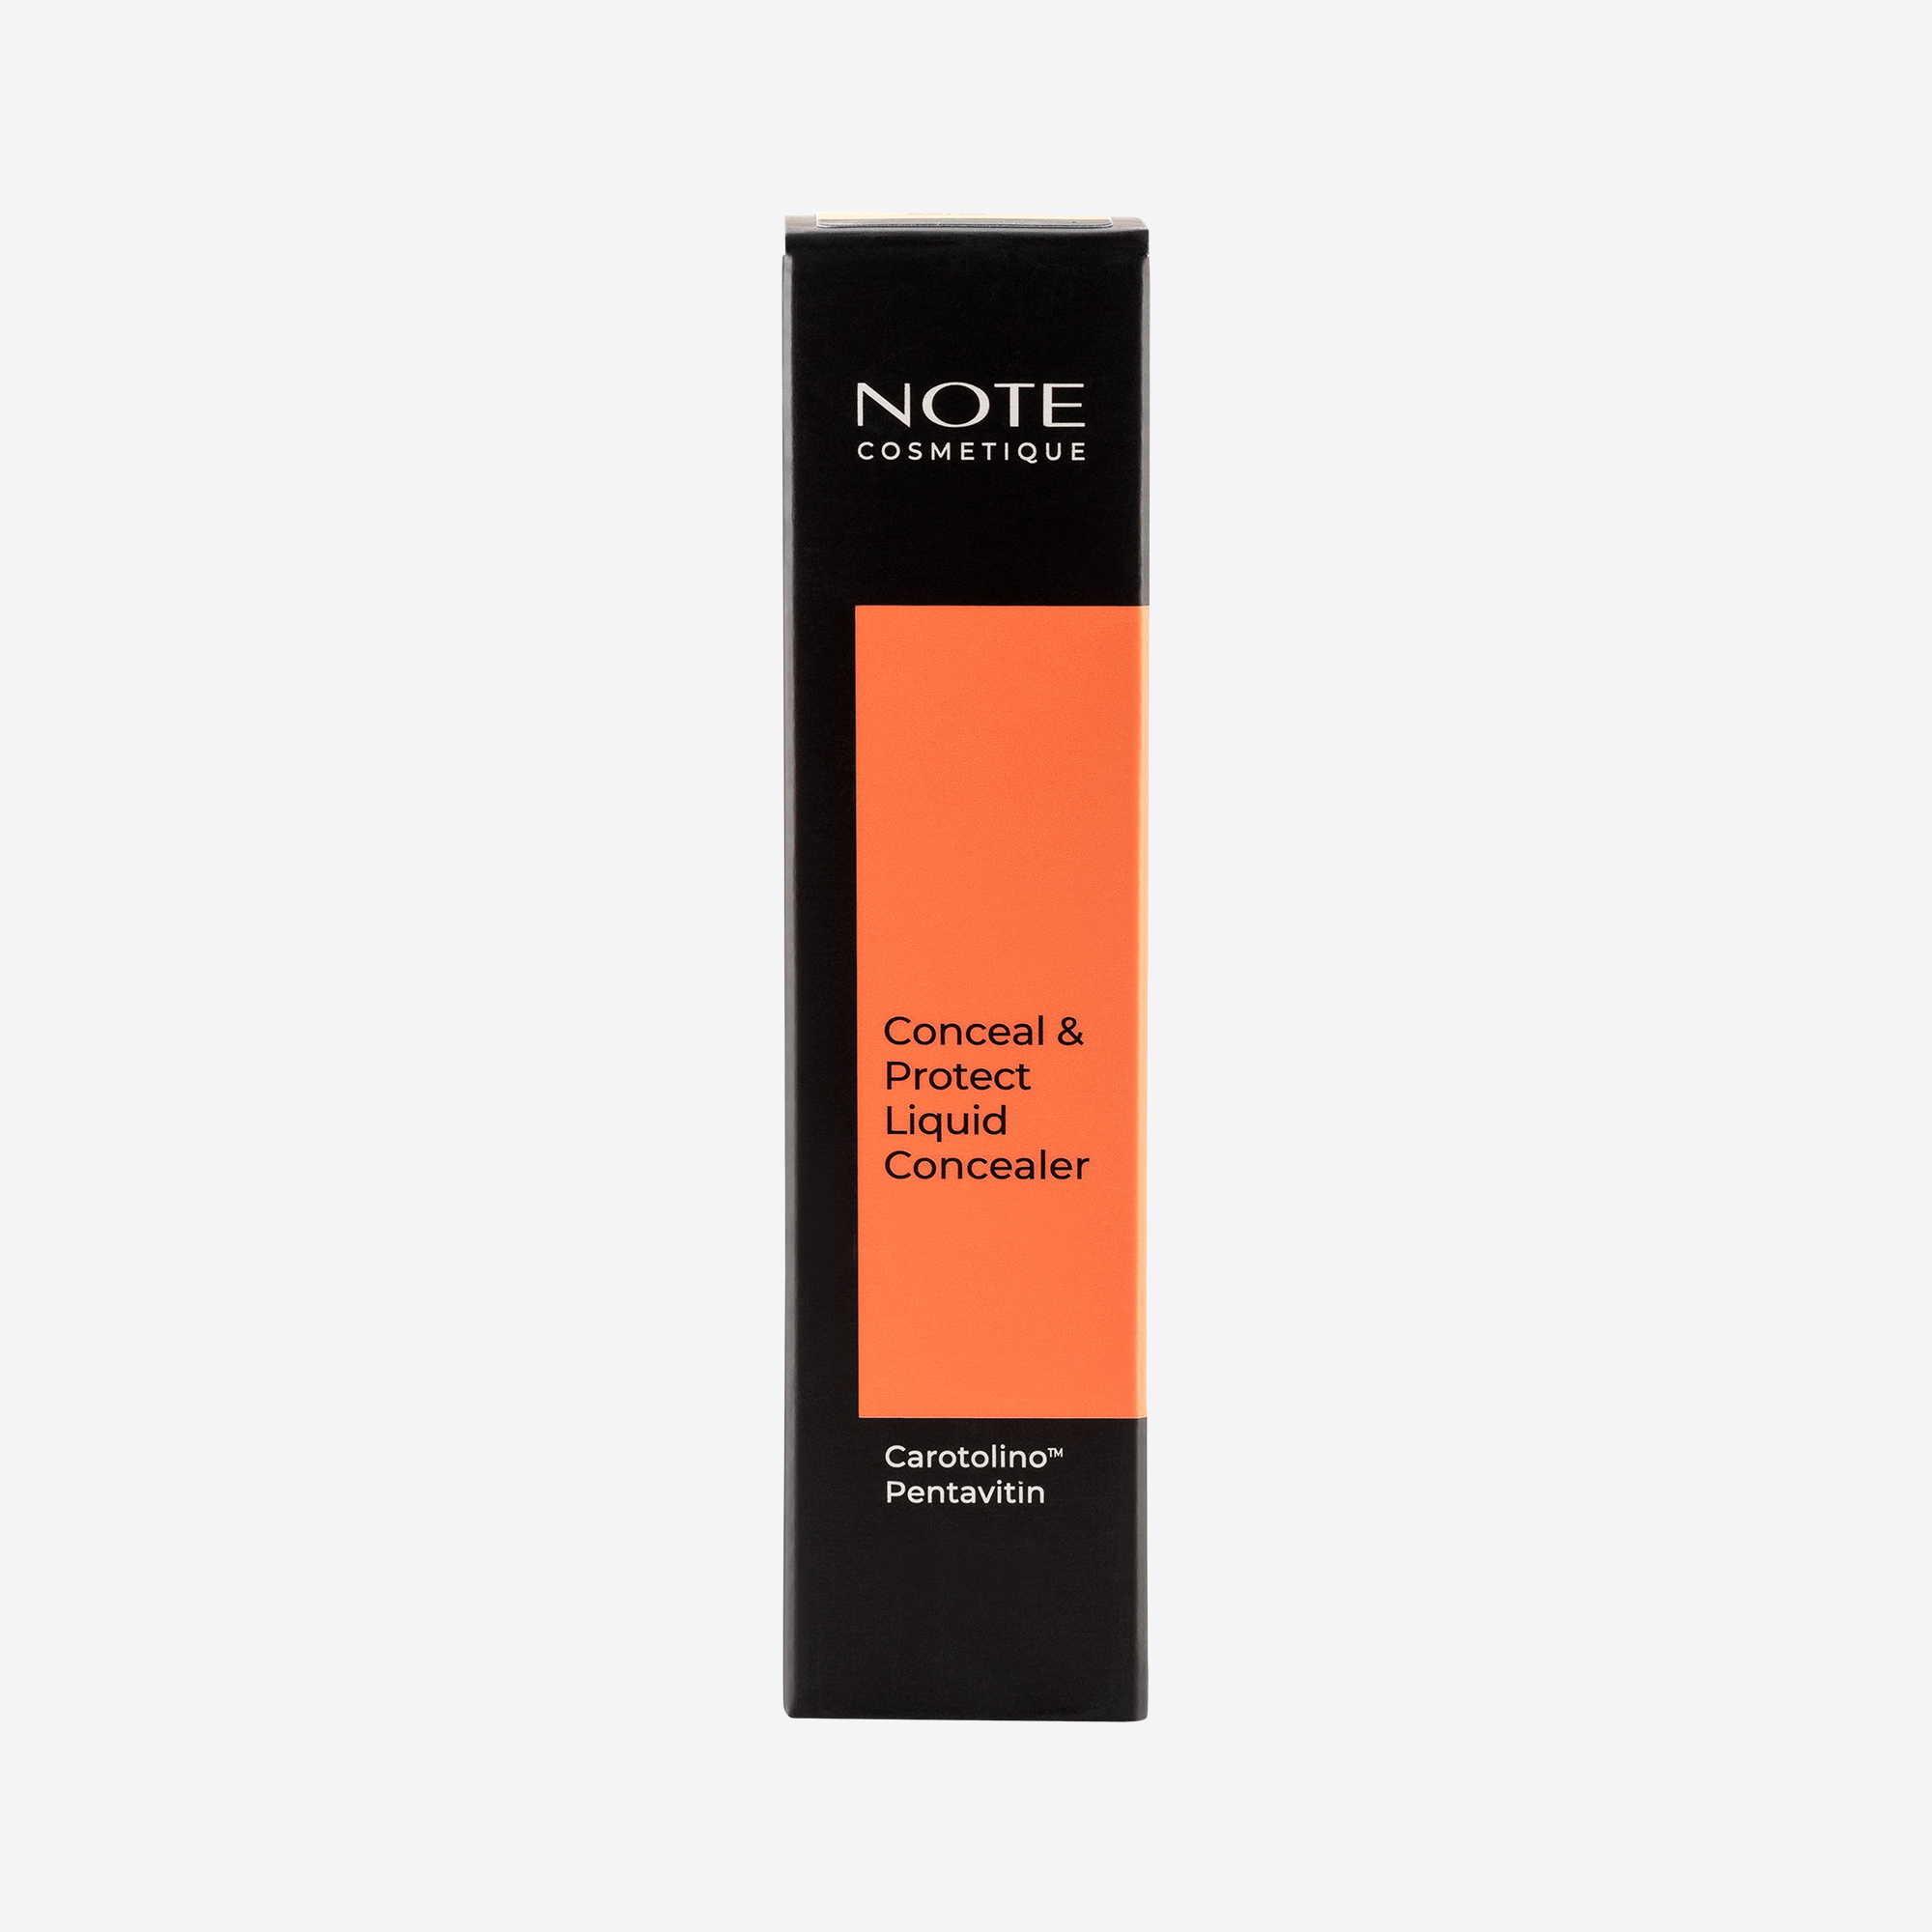 Conceal & Protect Liquid Concealer - NOTE Cosmetique